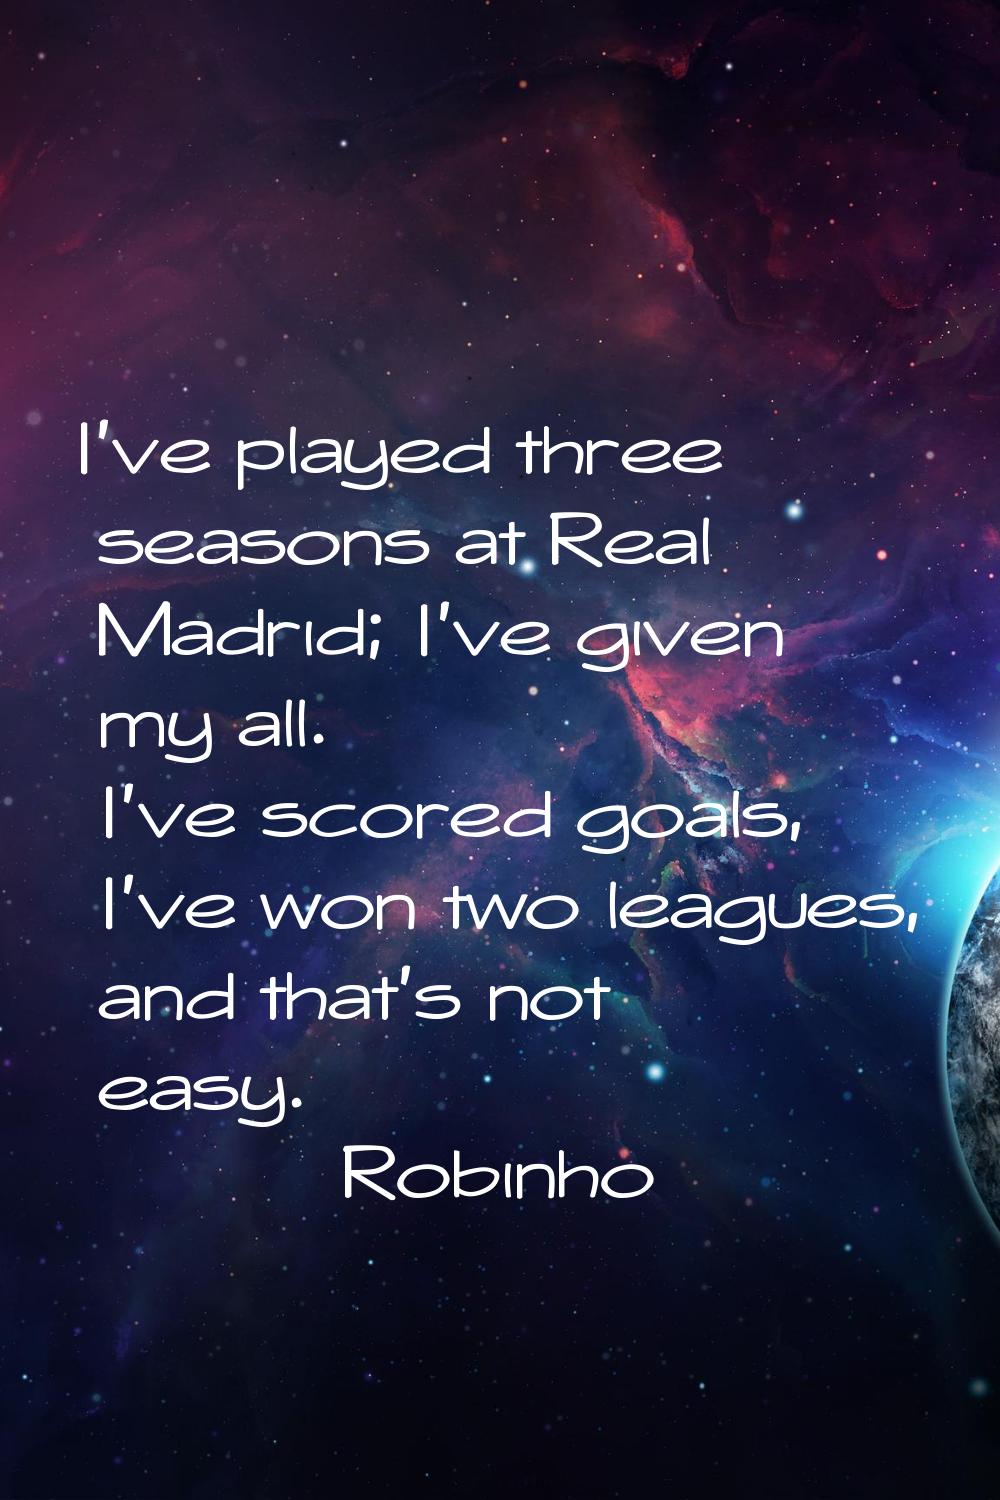 I've played three seasons at Real Madrid; I've given my all. I've scored goals, I've won two league